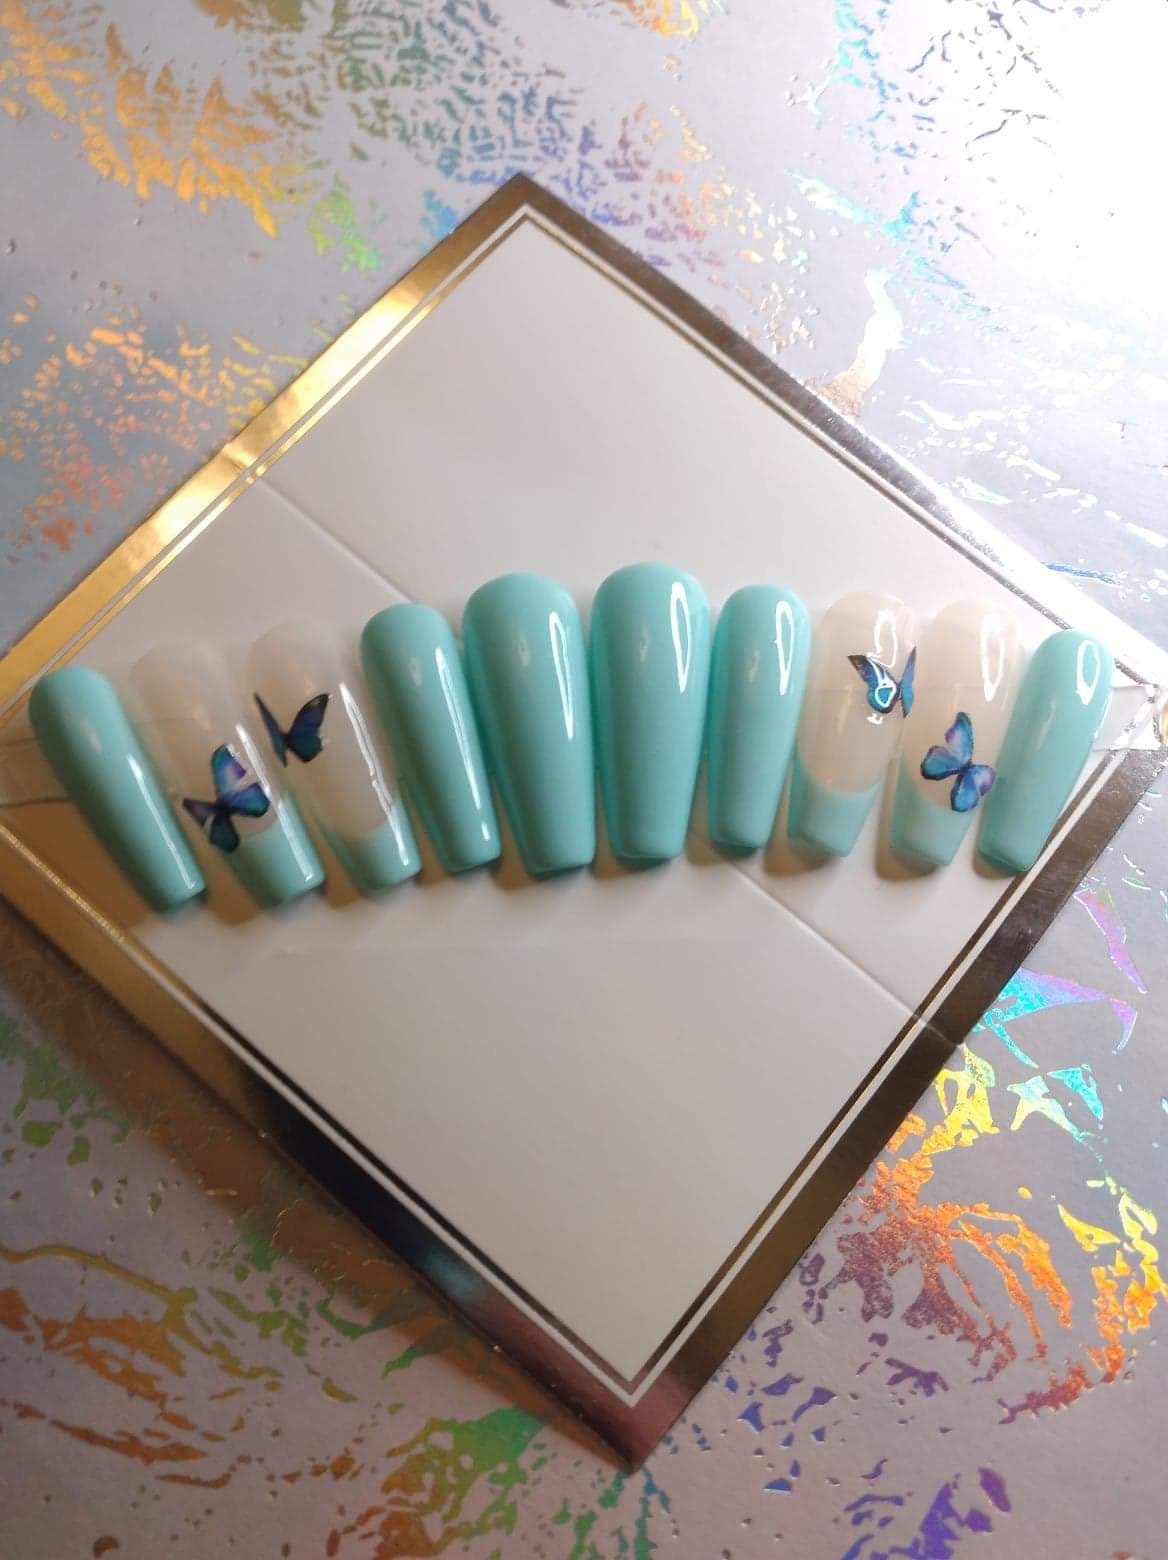 Teal and Ice Cream - Water Decal Nail Art - Hermit Werds